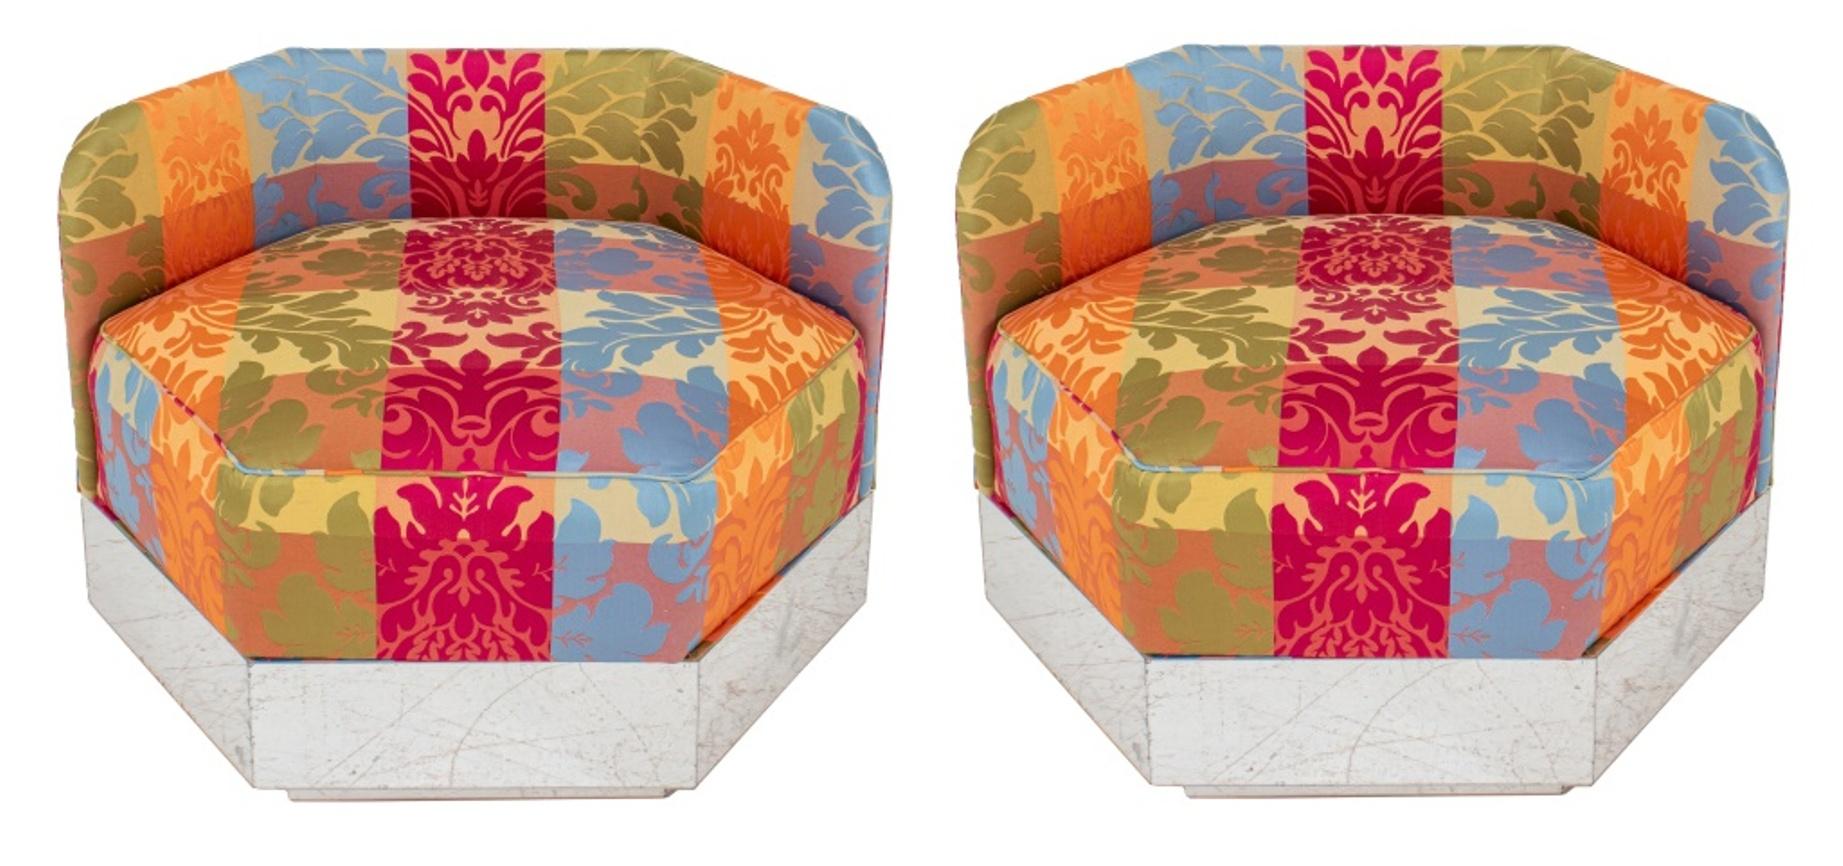 Pair of Modernist hexagonal upholstered swivel chairs, in the style of the Peter Murdoch (British, b. 1940) 